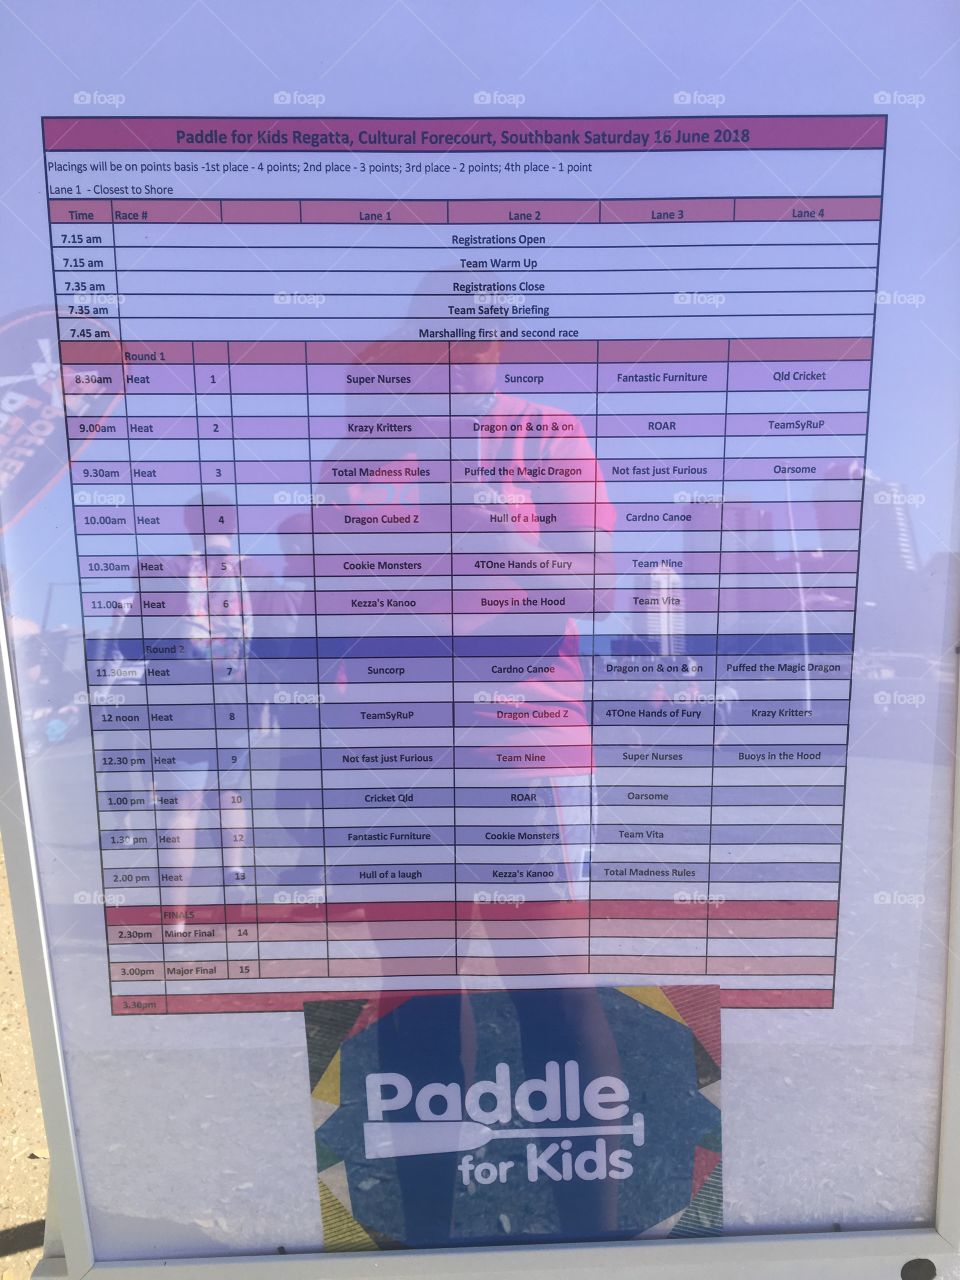 Paddle for Kids